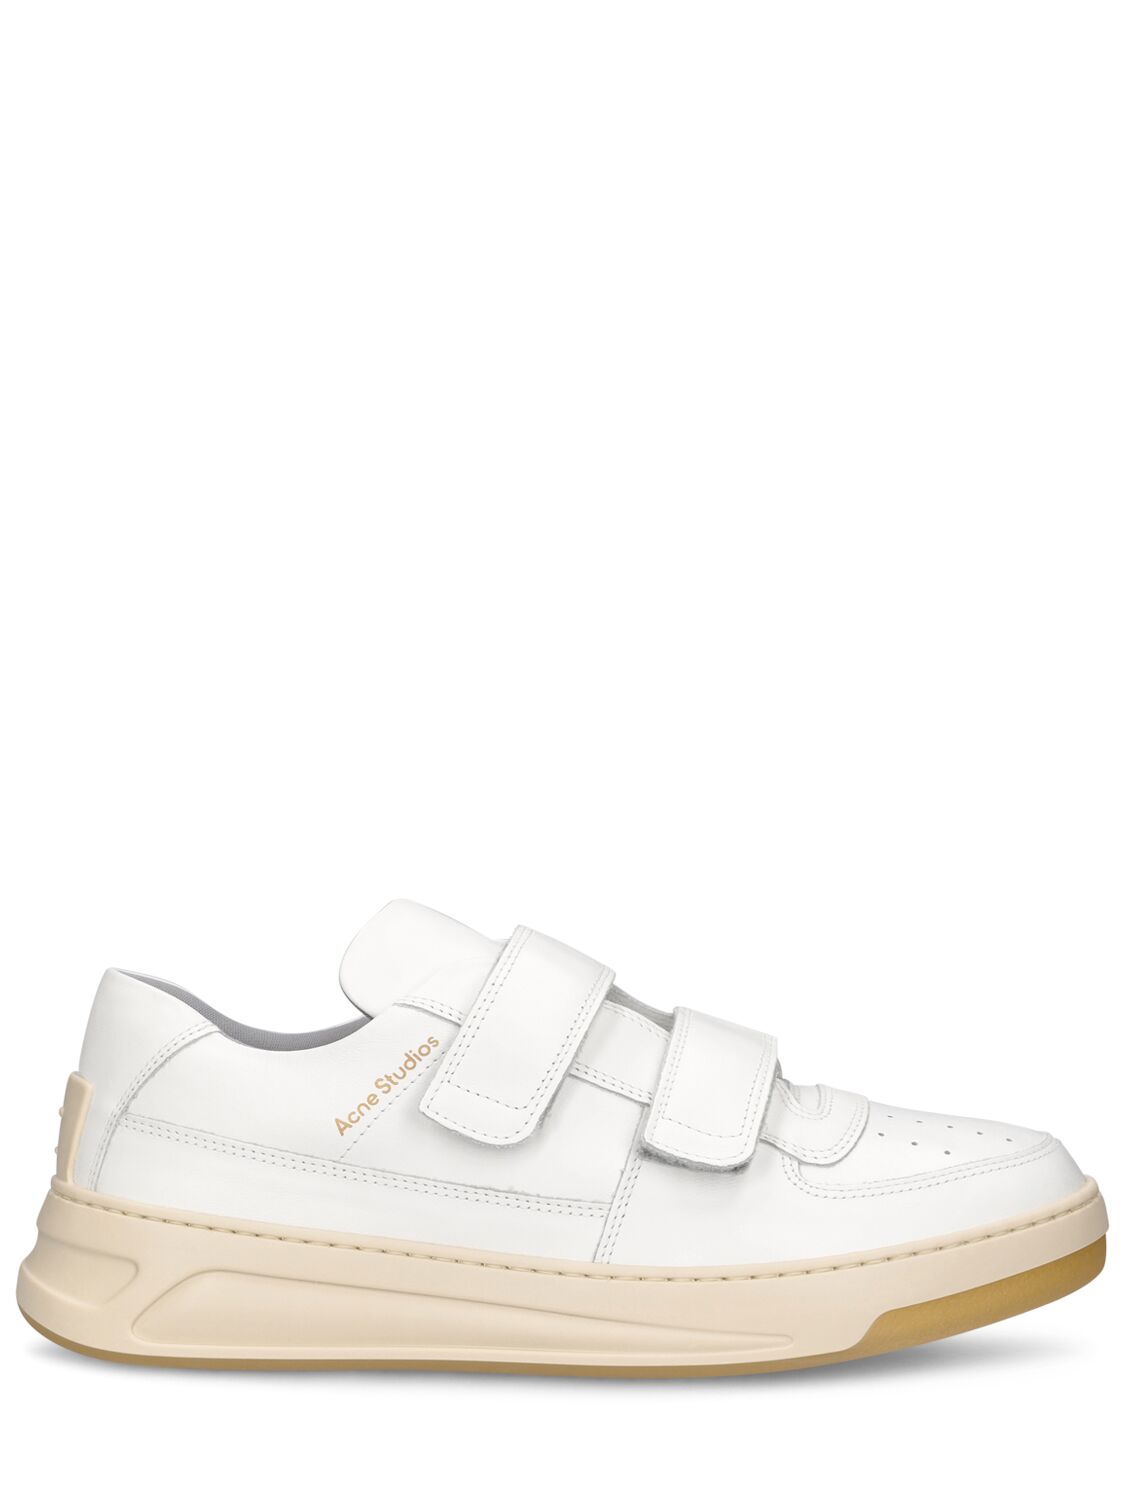 Image of Perey Friend Leather Low Top Sneakers